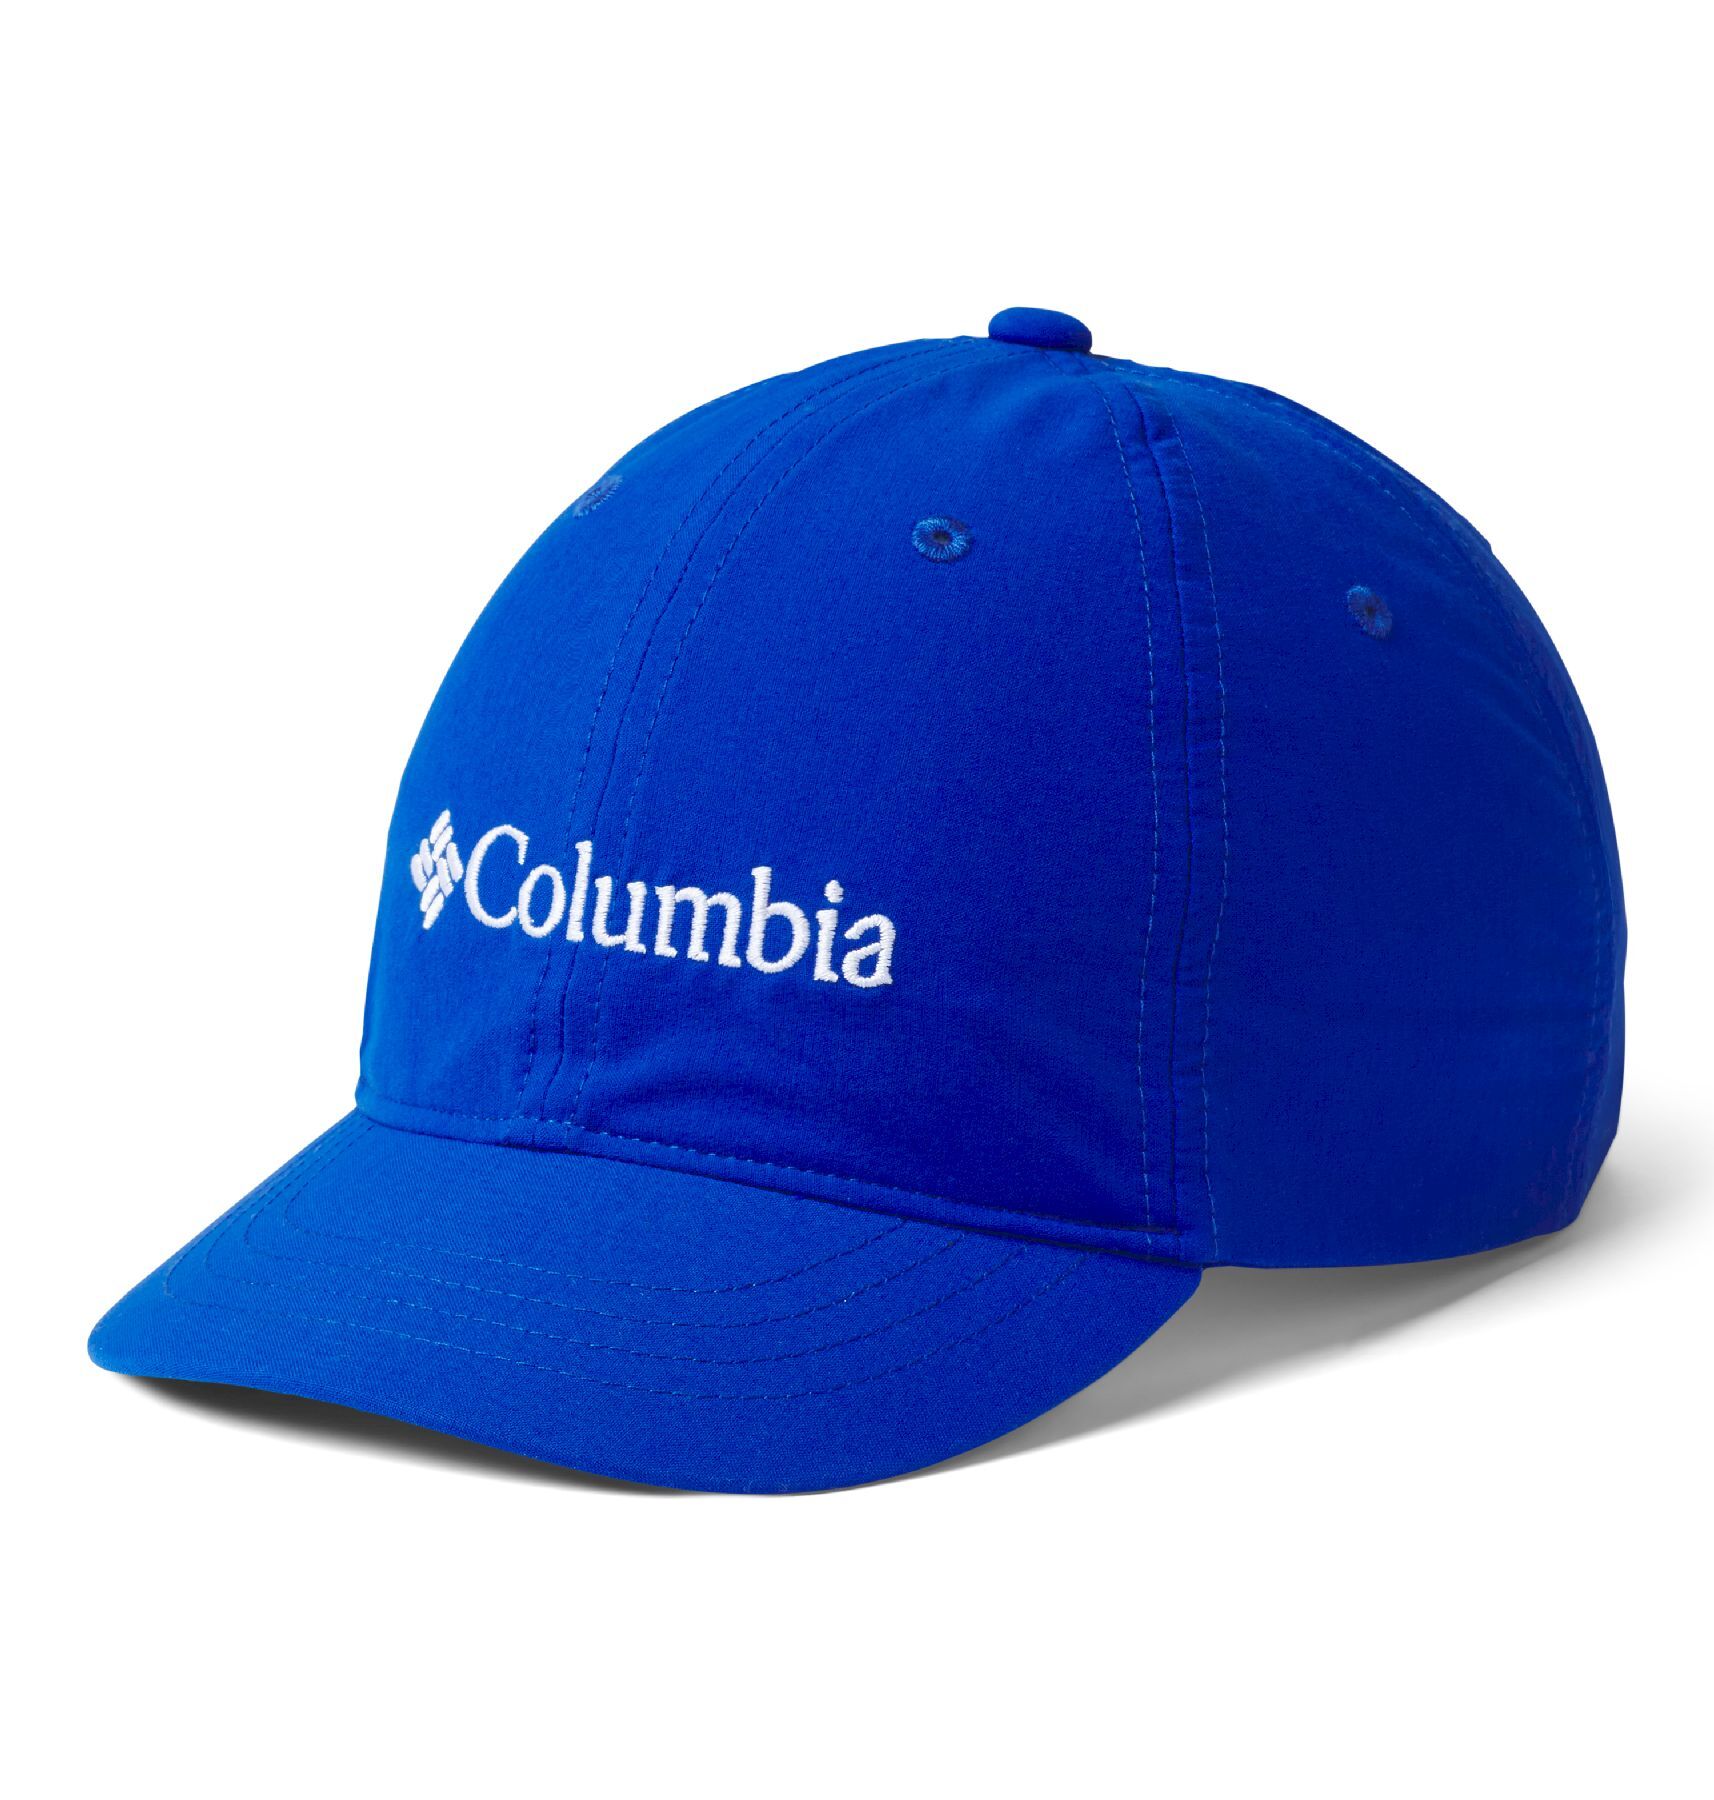 Columbia Youth Adjustable Ball Cap - Keps